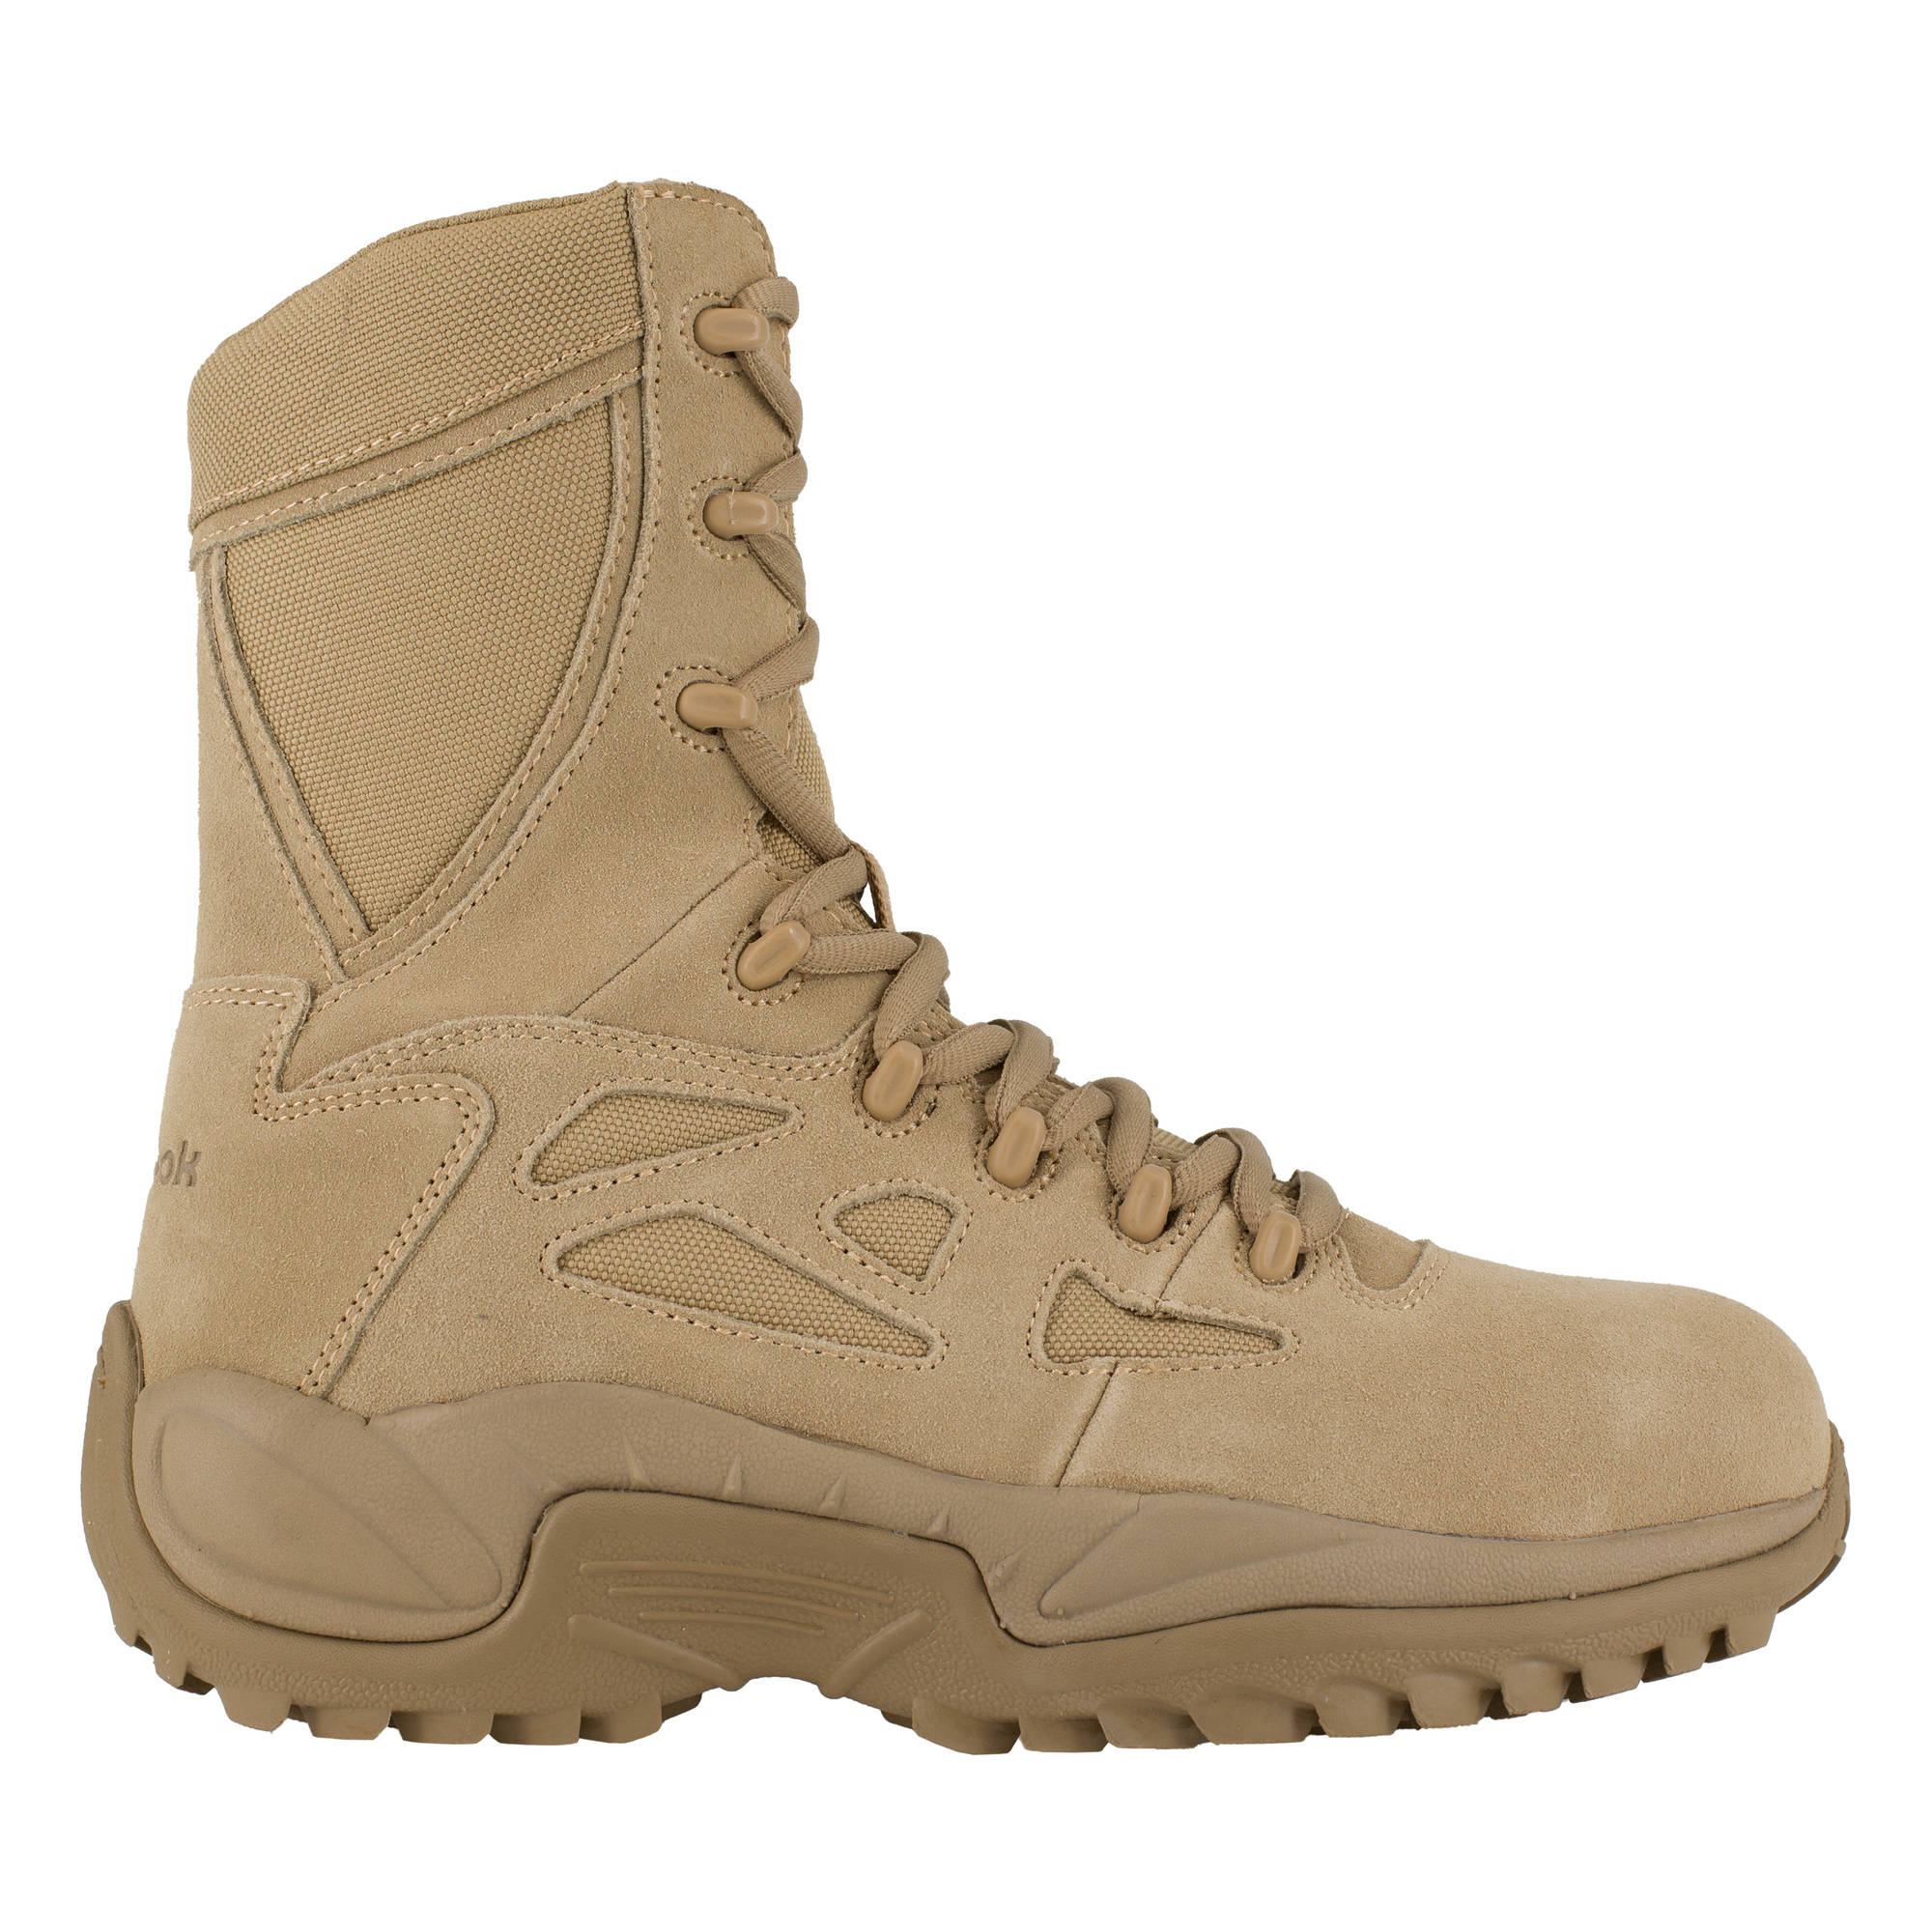 Reebok, 8Inch Stealth Tactical Boot with Side Zipper, Size 10 1/2, Width Medium, Color Desert Tan, Model RB894